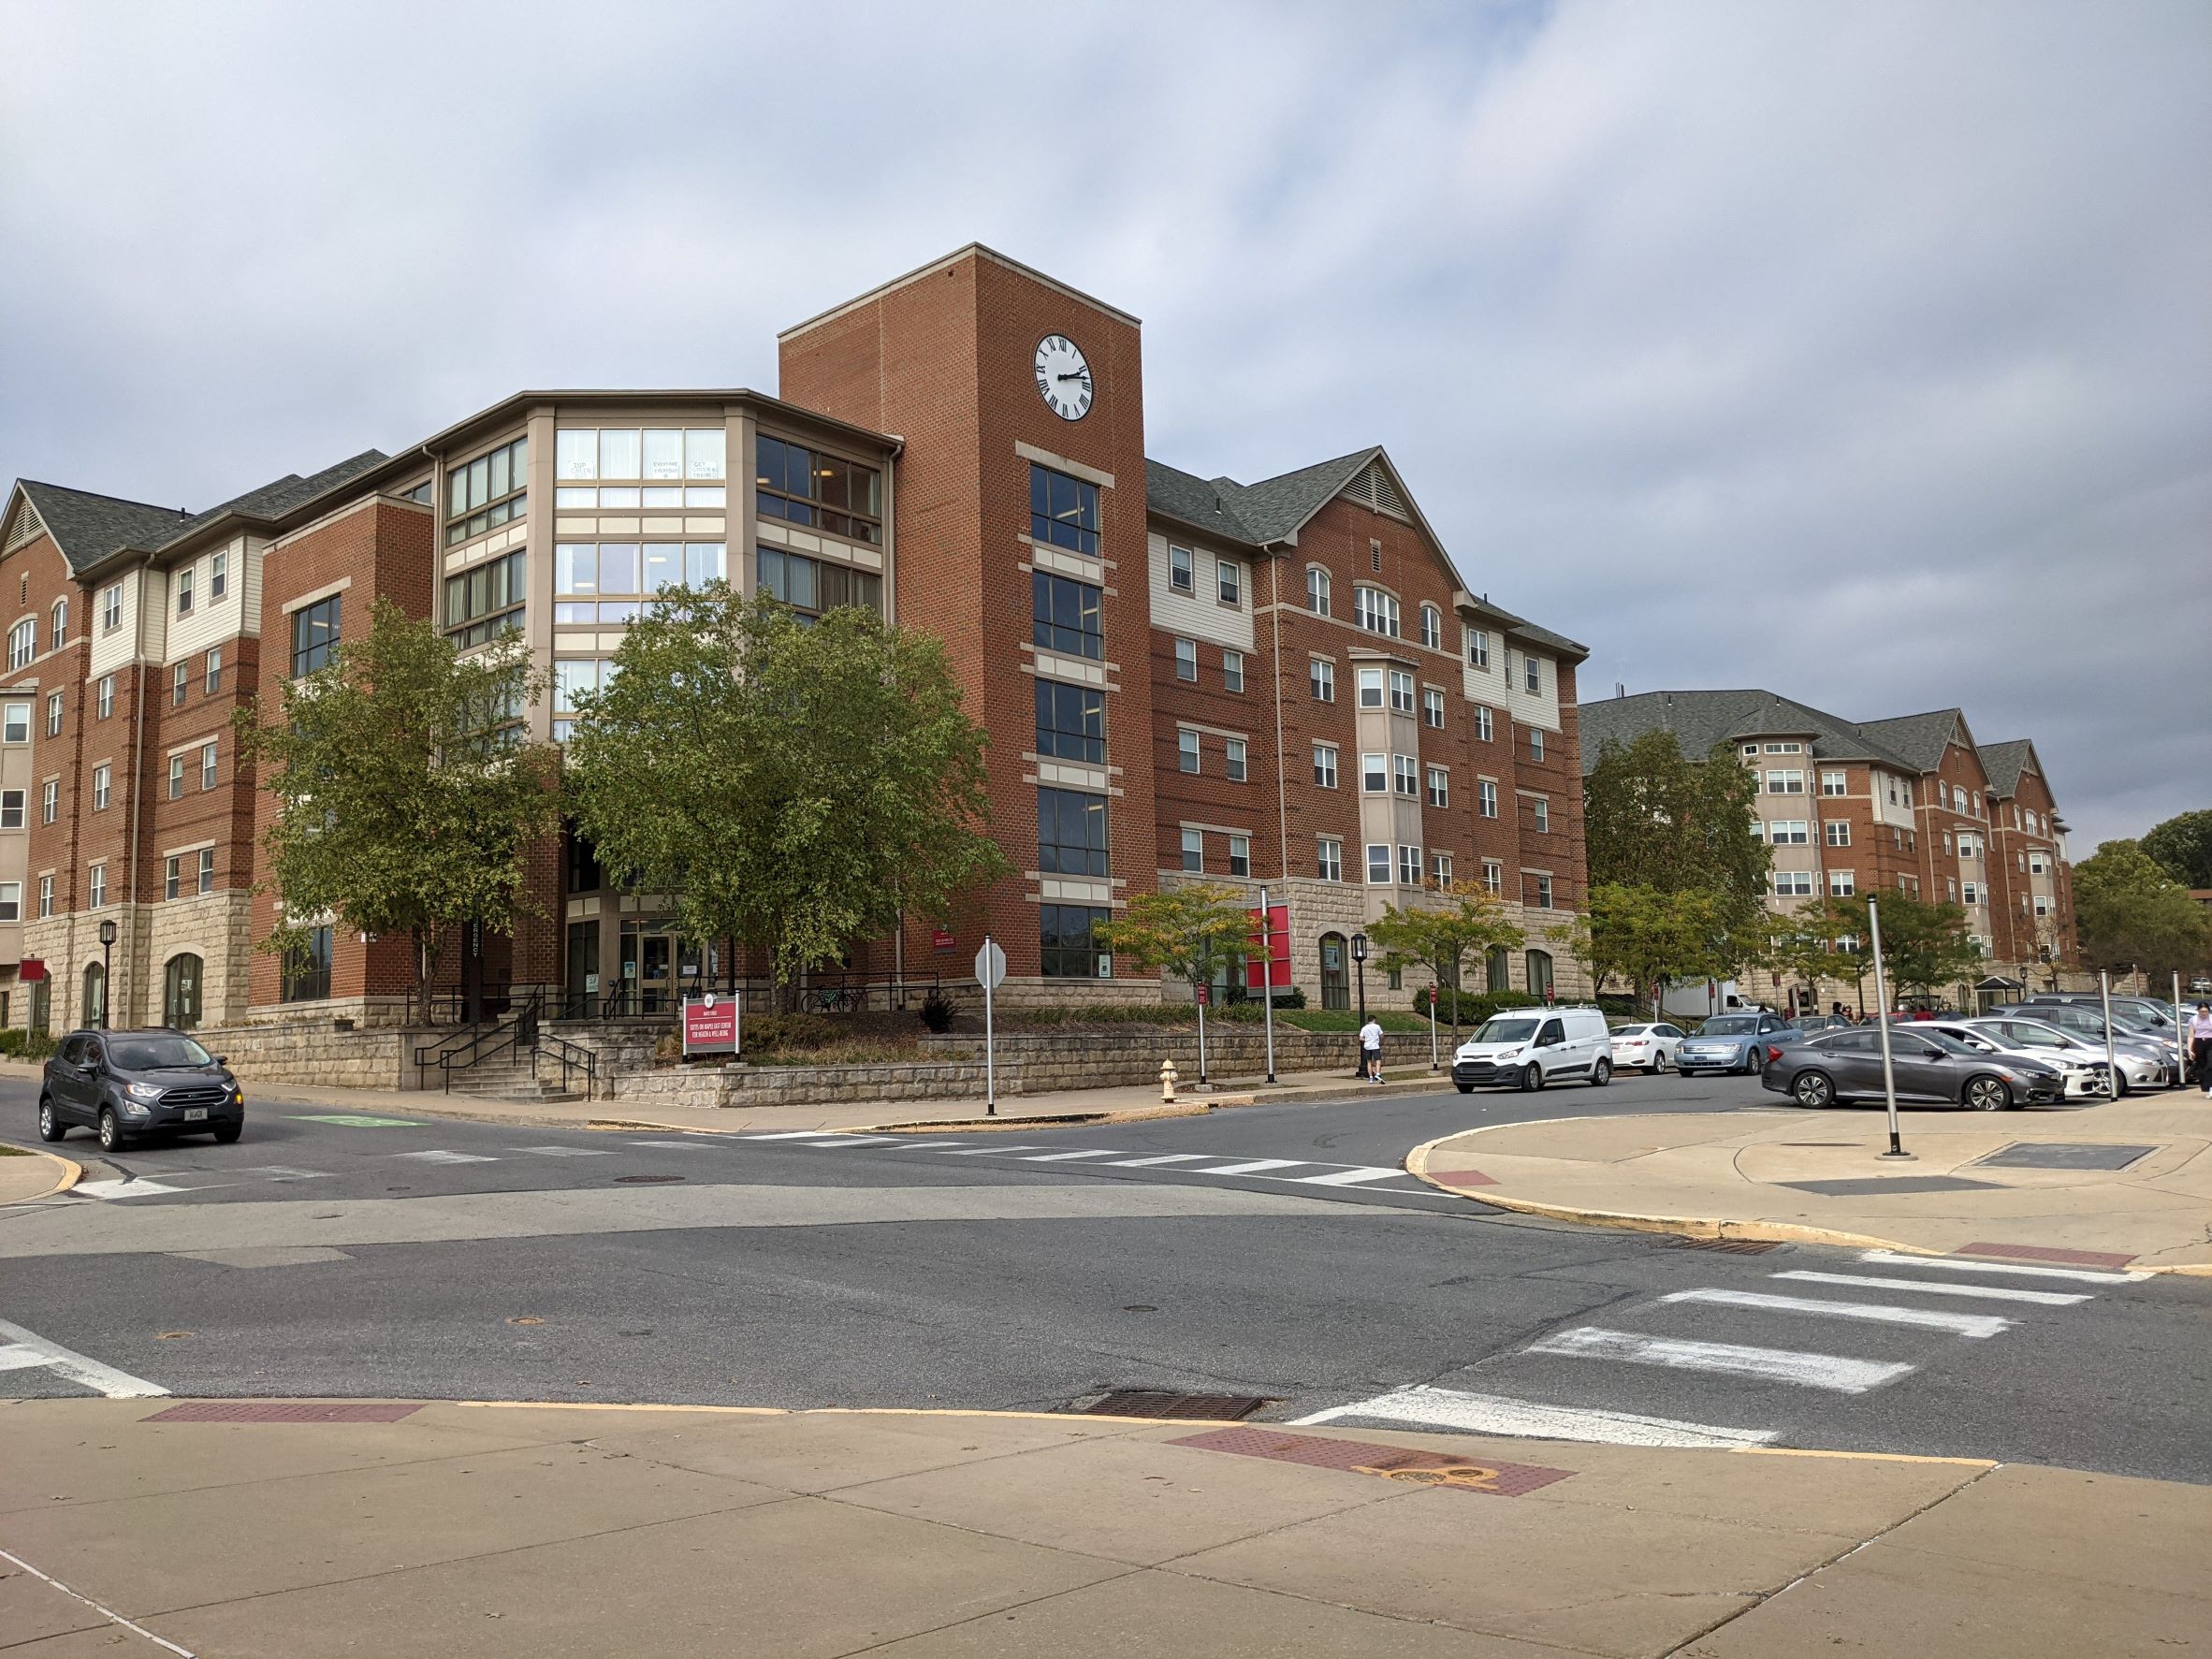 Traditional looking five story red brick living learning student housing community dormitory building with large clock tower overlooking large campus intersection